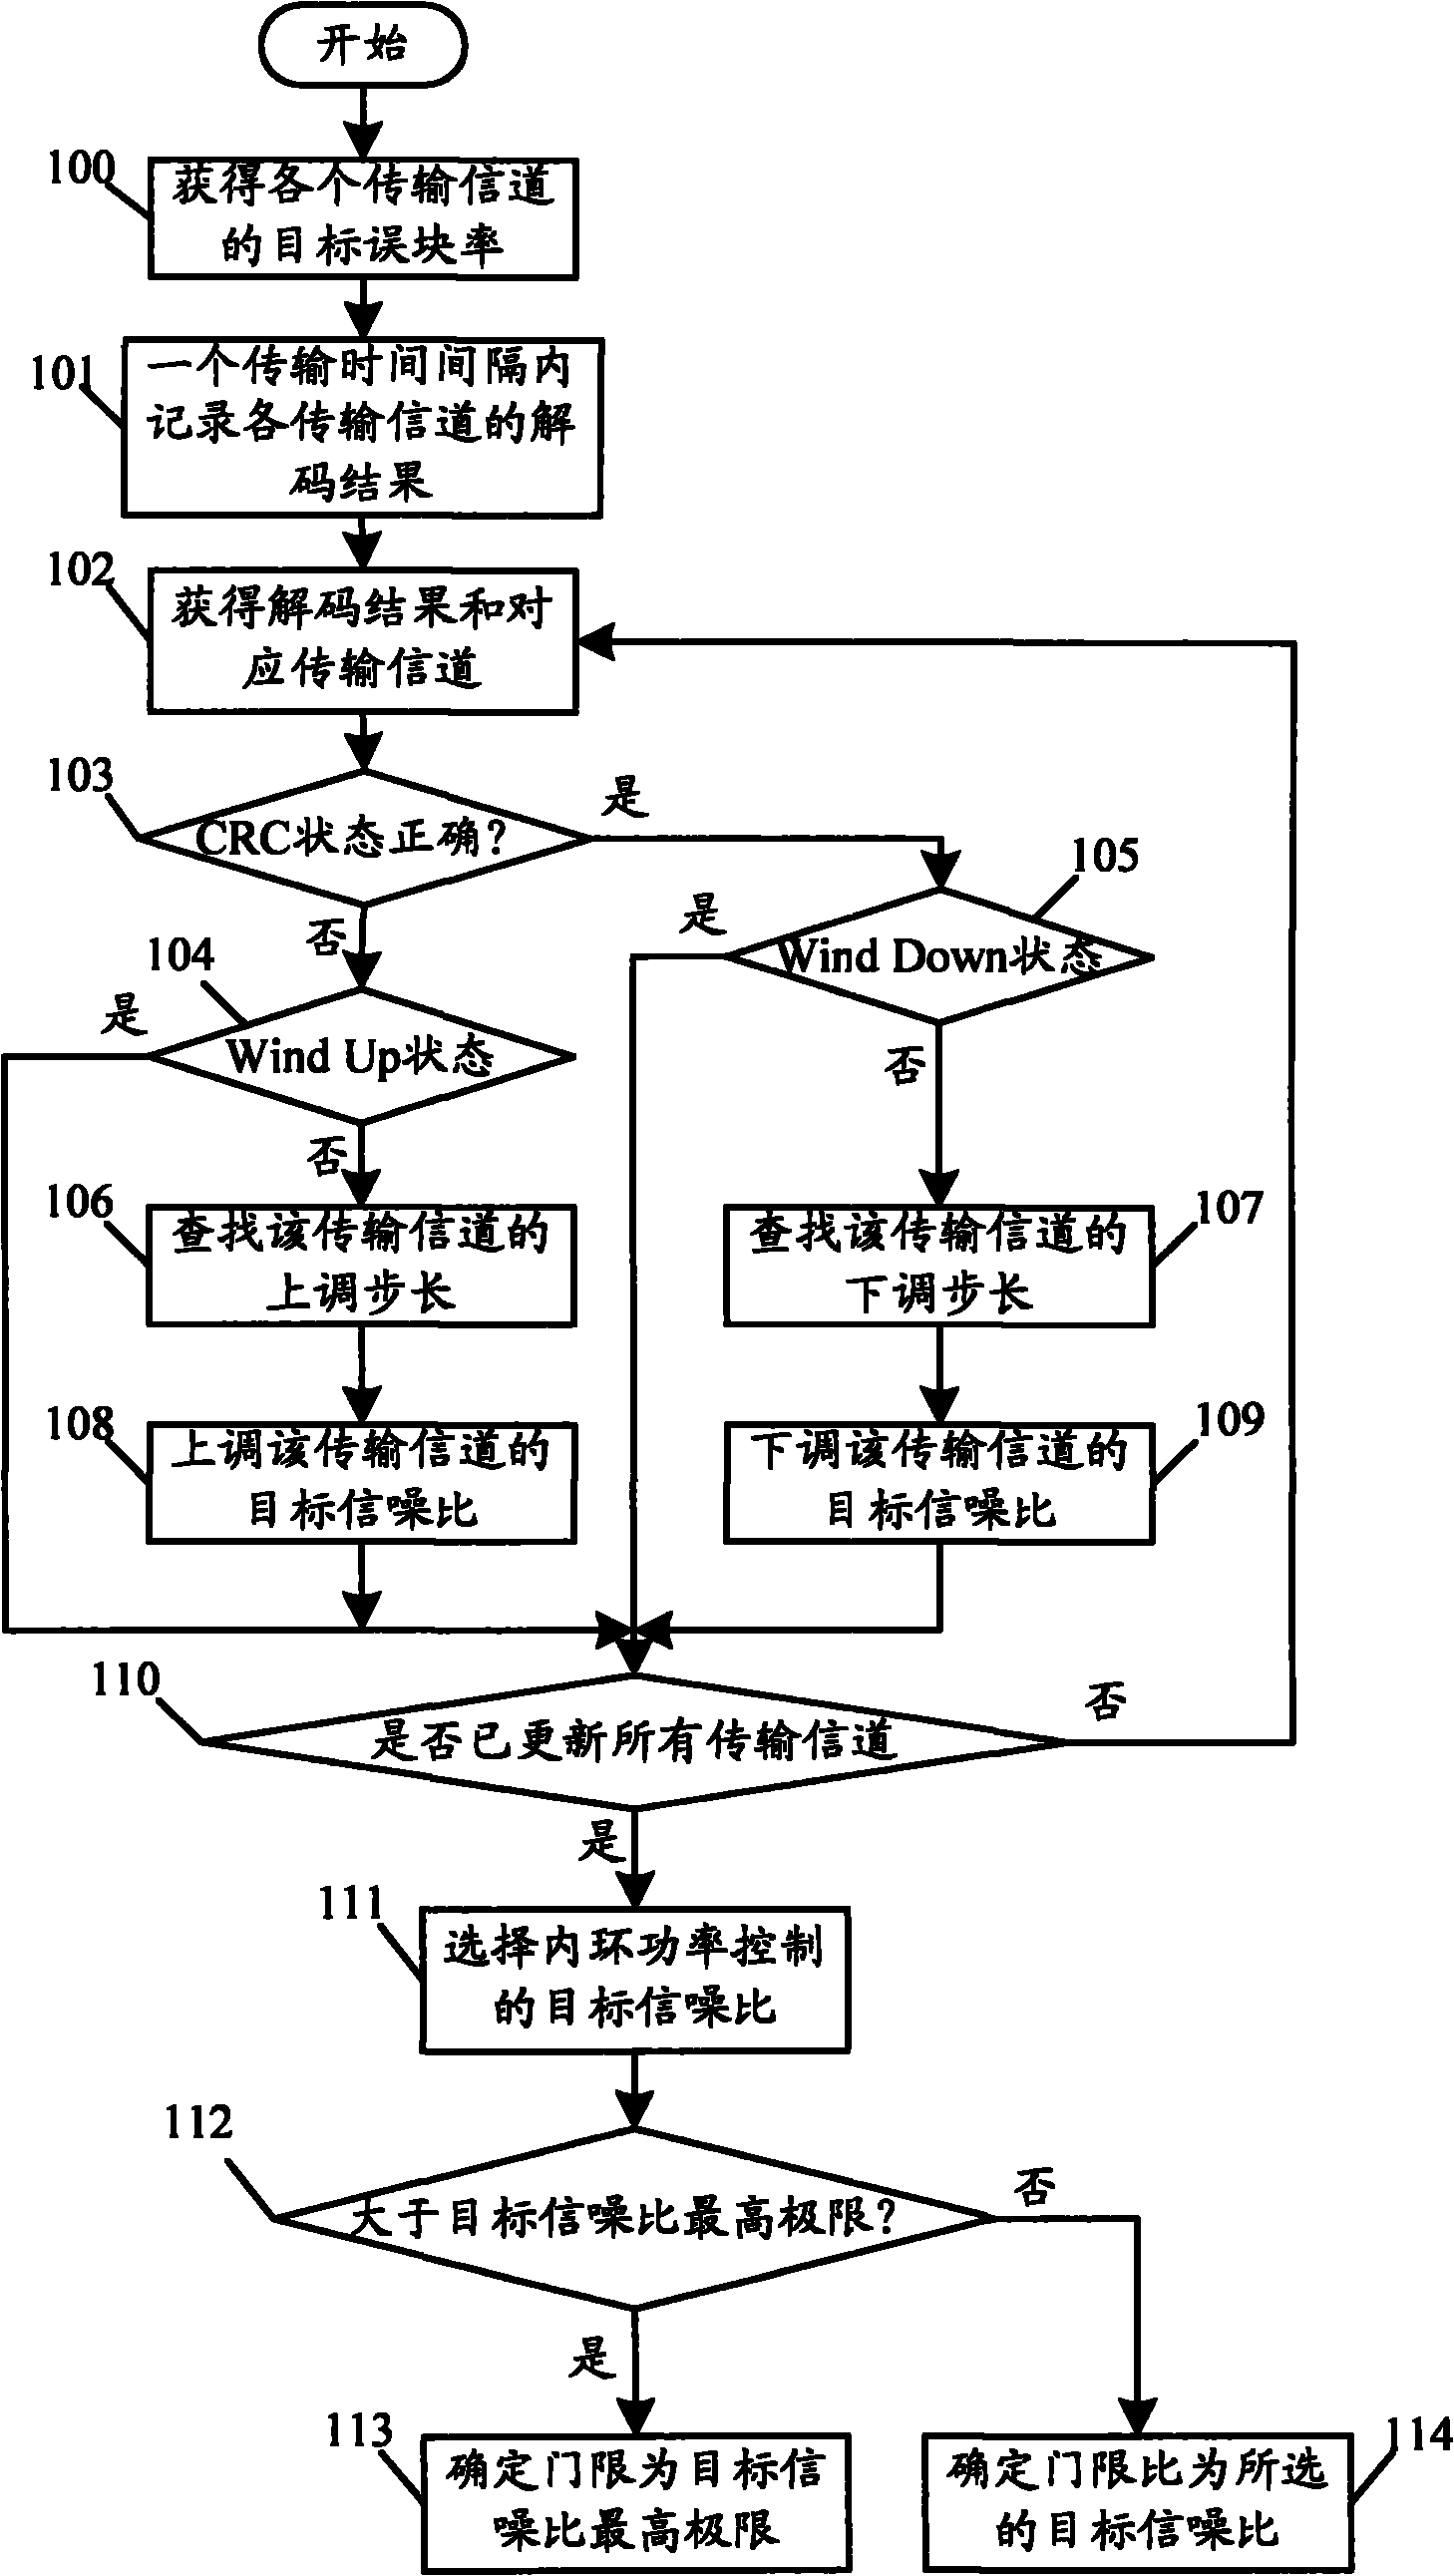 Method for controlling outer loop power of mobile terminal in code division multiple access mobile communication system